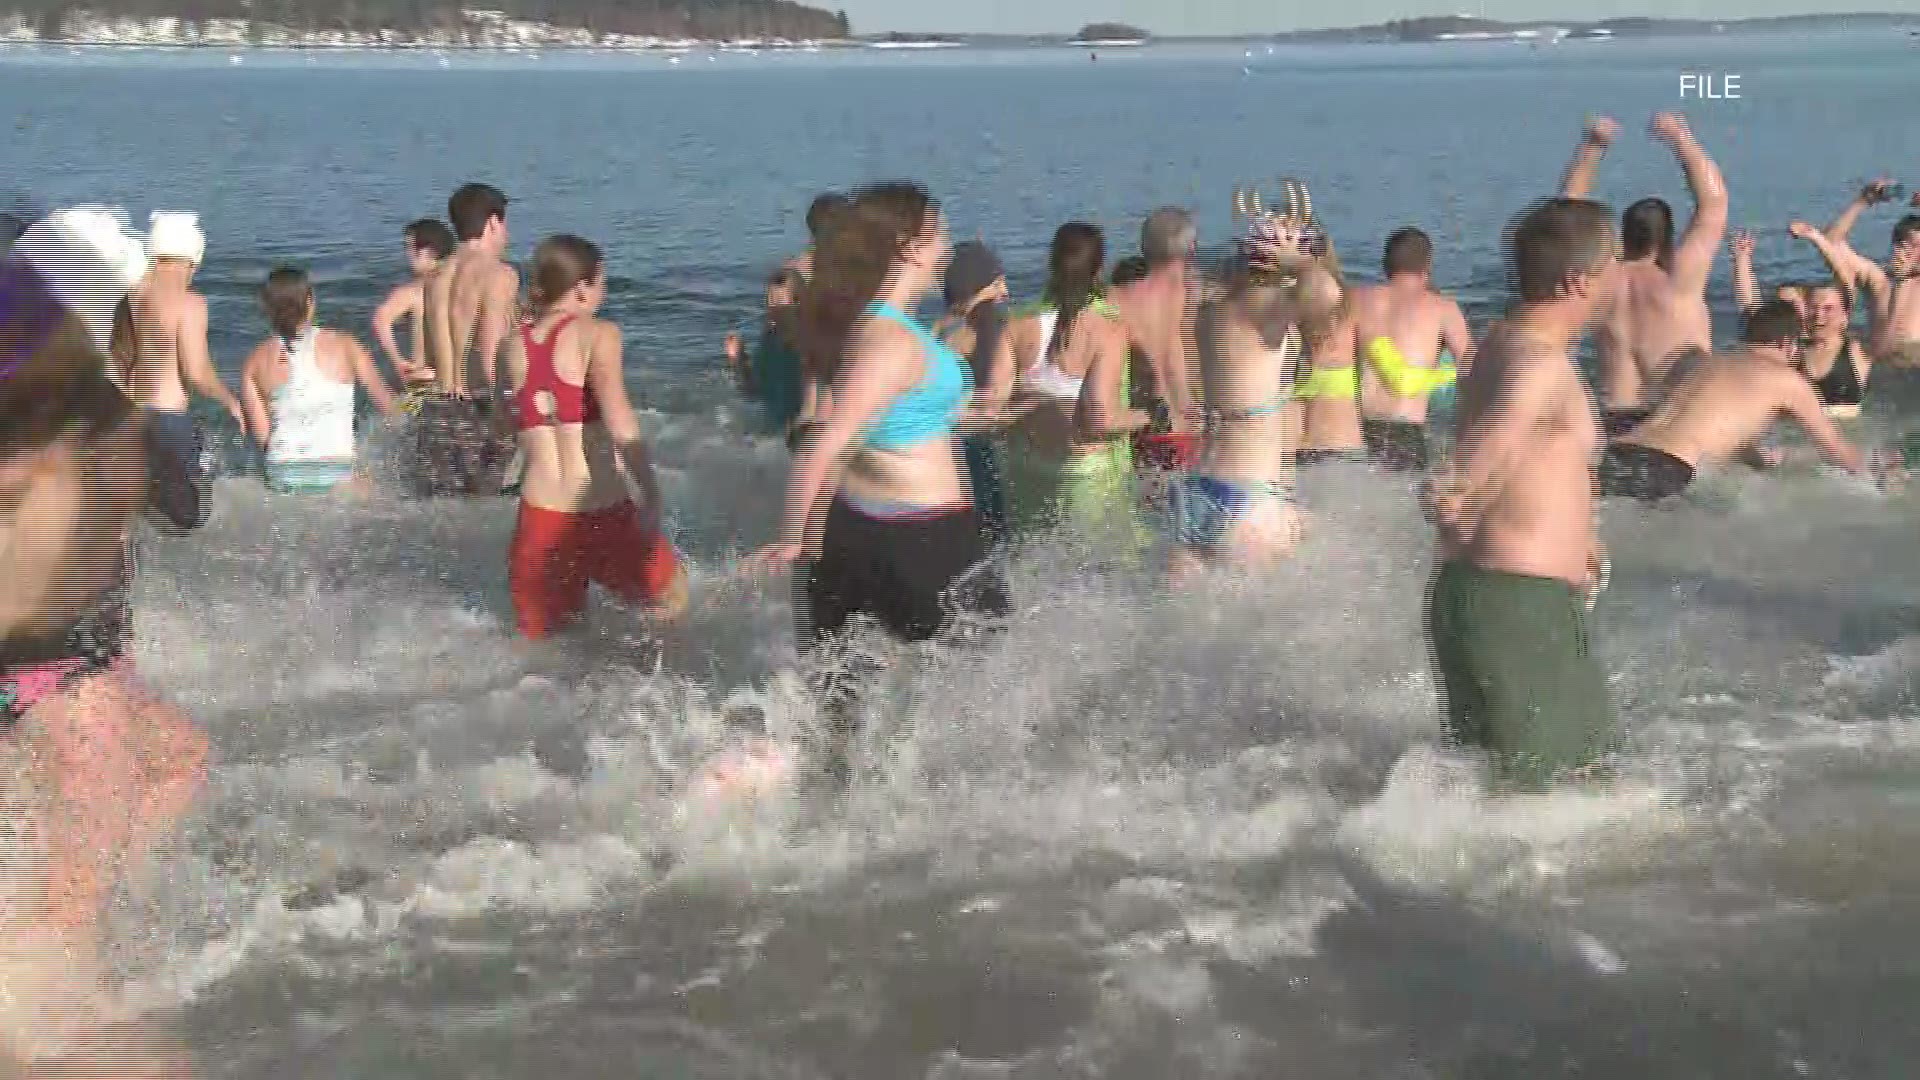 With covid numbers continuing to rise, organizations in Maine ask people to make a splash on their own instead of crowded polar plunges and lobster dips.